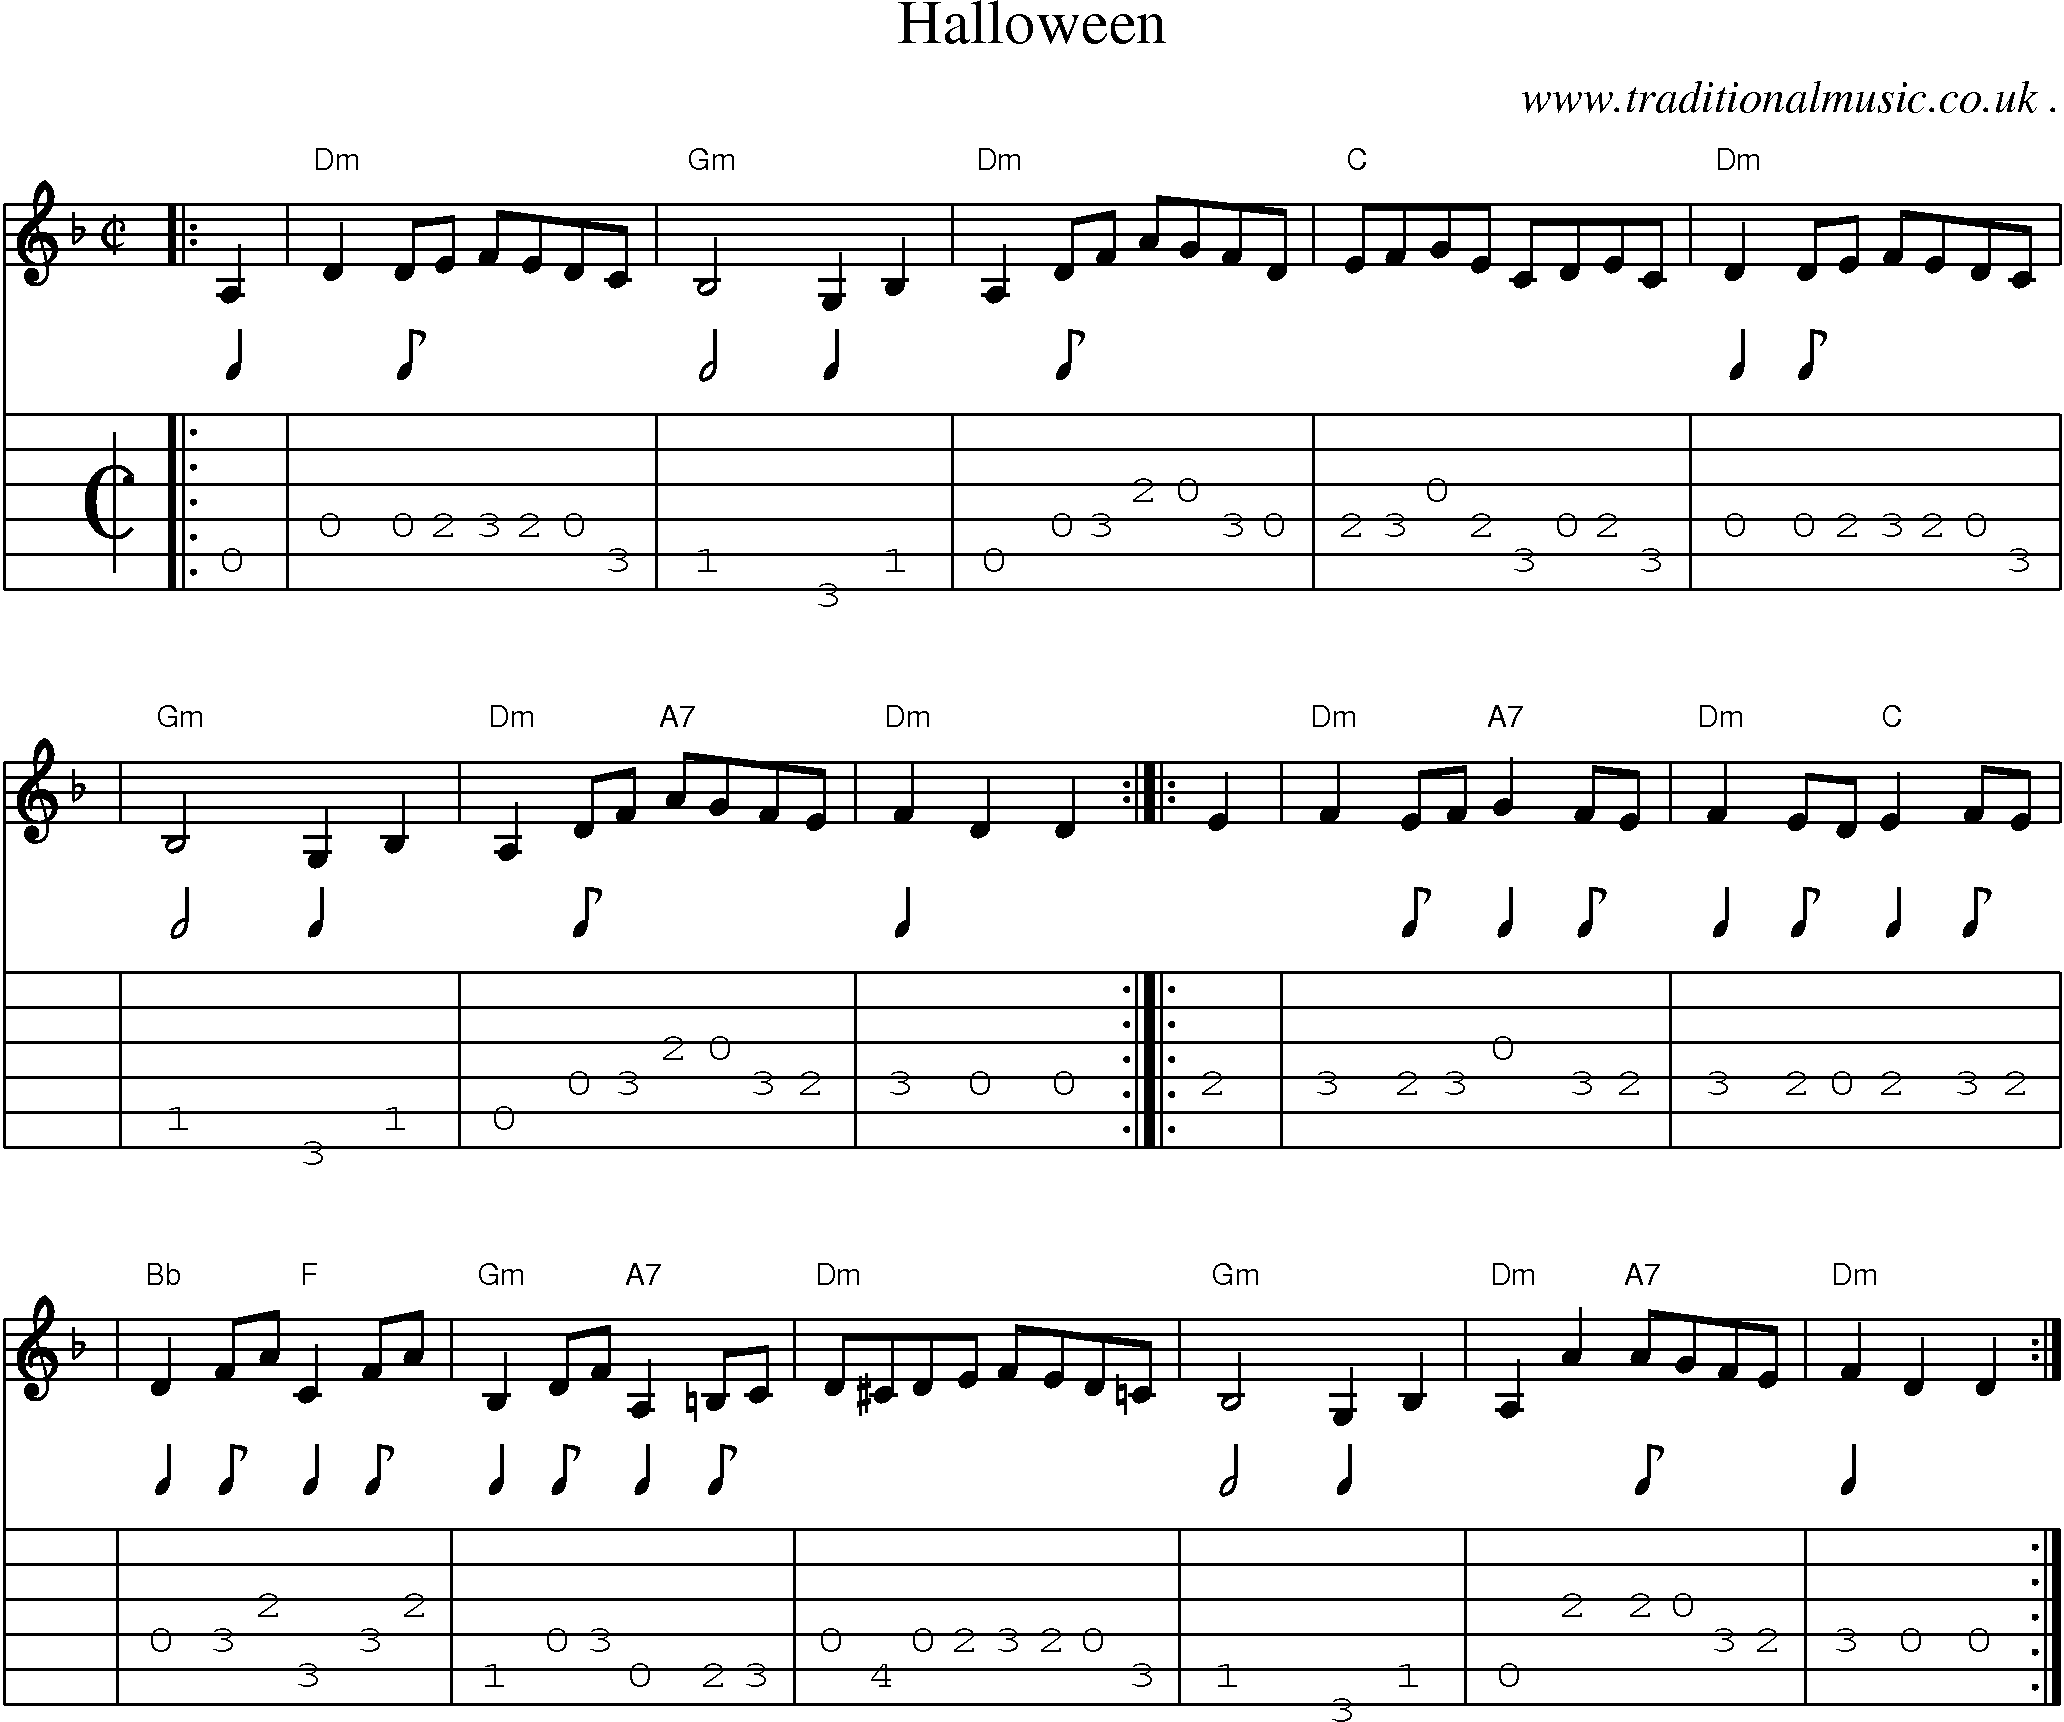 Sheet-music  score, Chords and Guitar Tabs for Halloween